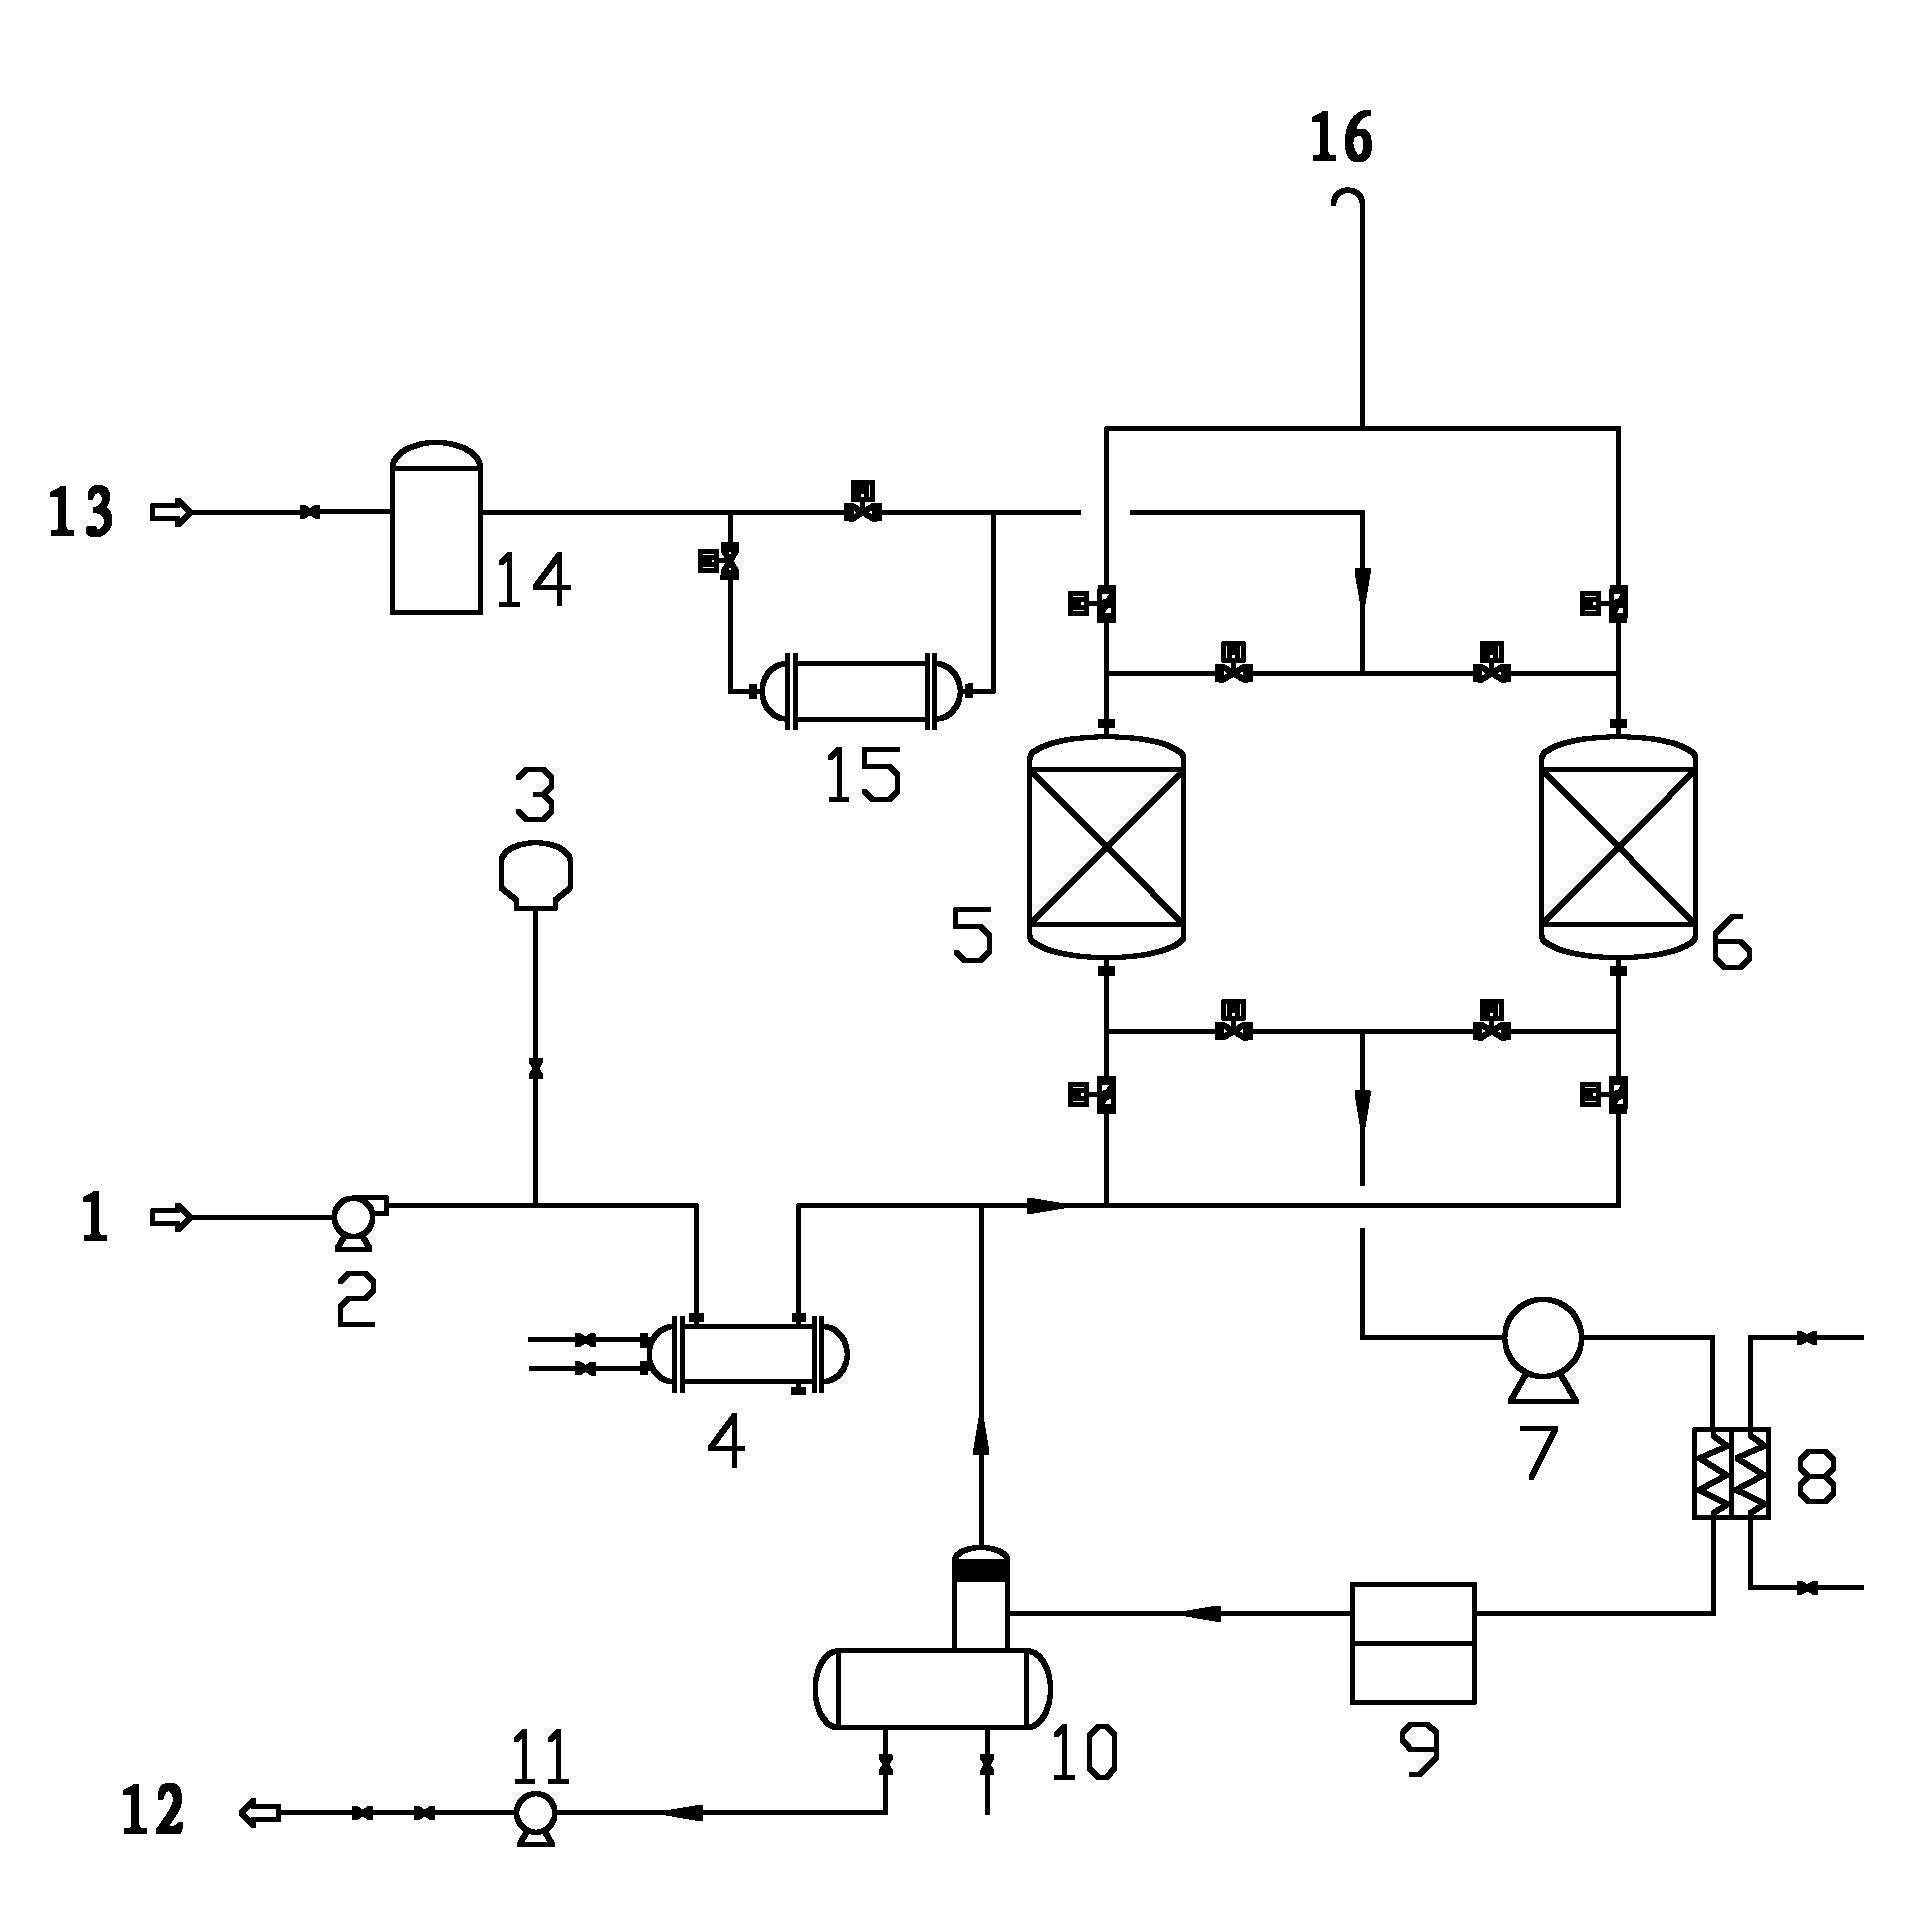 Treatment process for absorbed condensate waste gas